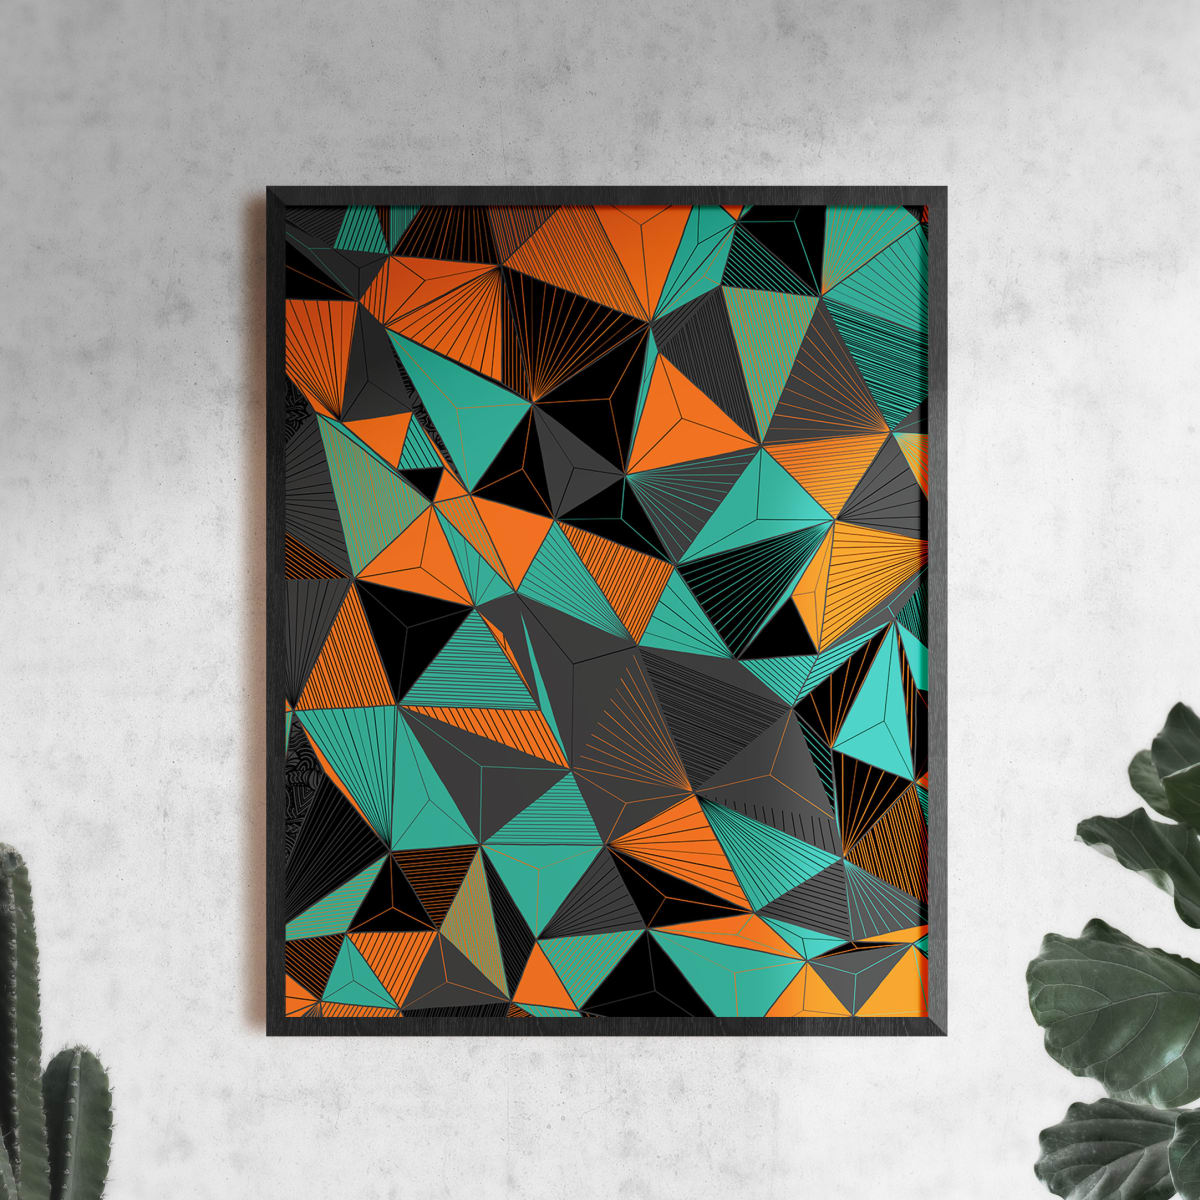 "Conscious Growth 094" Large One-of-a-Kind Print by Debbie Clapper  Image: Conscious Growth Print 094, a black, teal, orange, and gray one of a kind archival modern art print